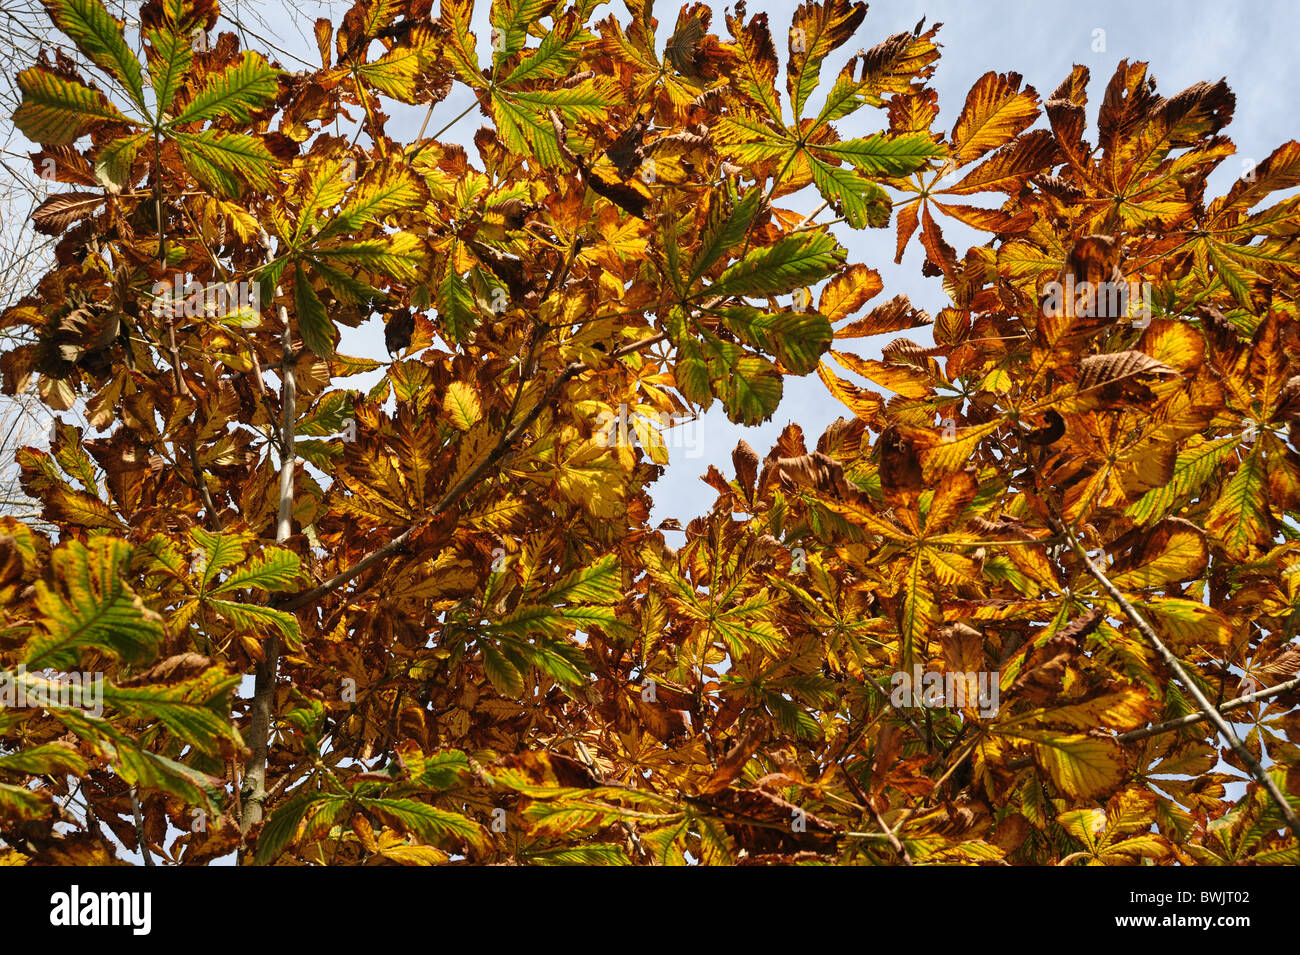 Young horse chestnut tree (Aesculus hippocastanum) foliage leaves in full autumn colour Stock Photo